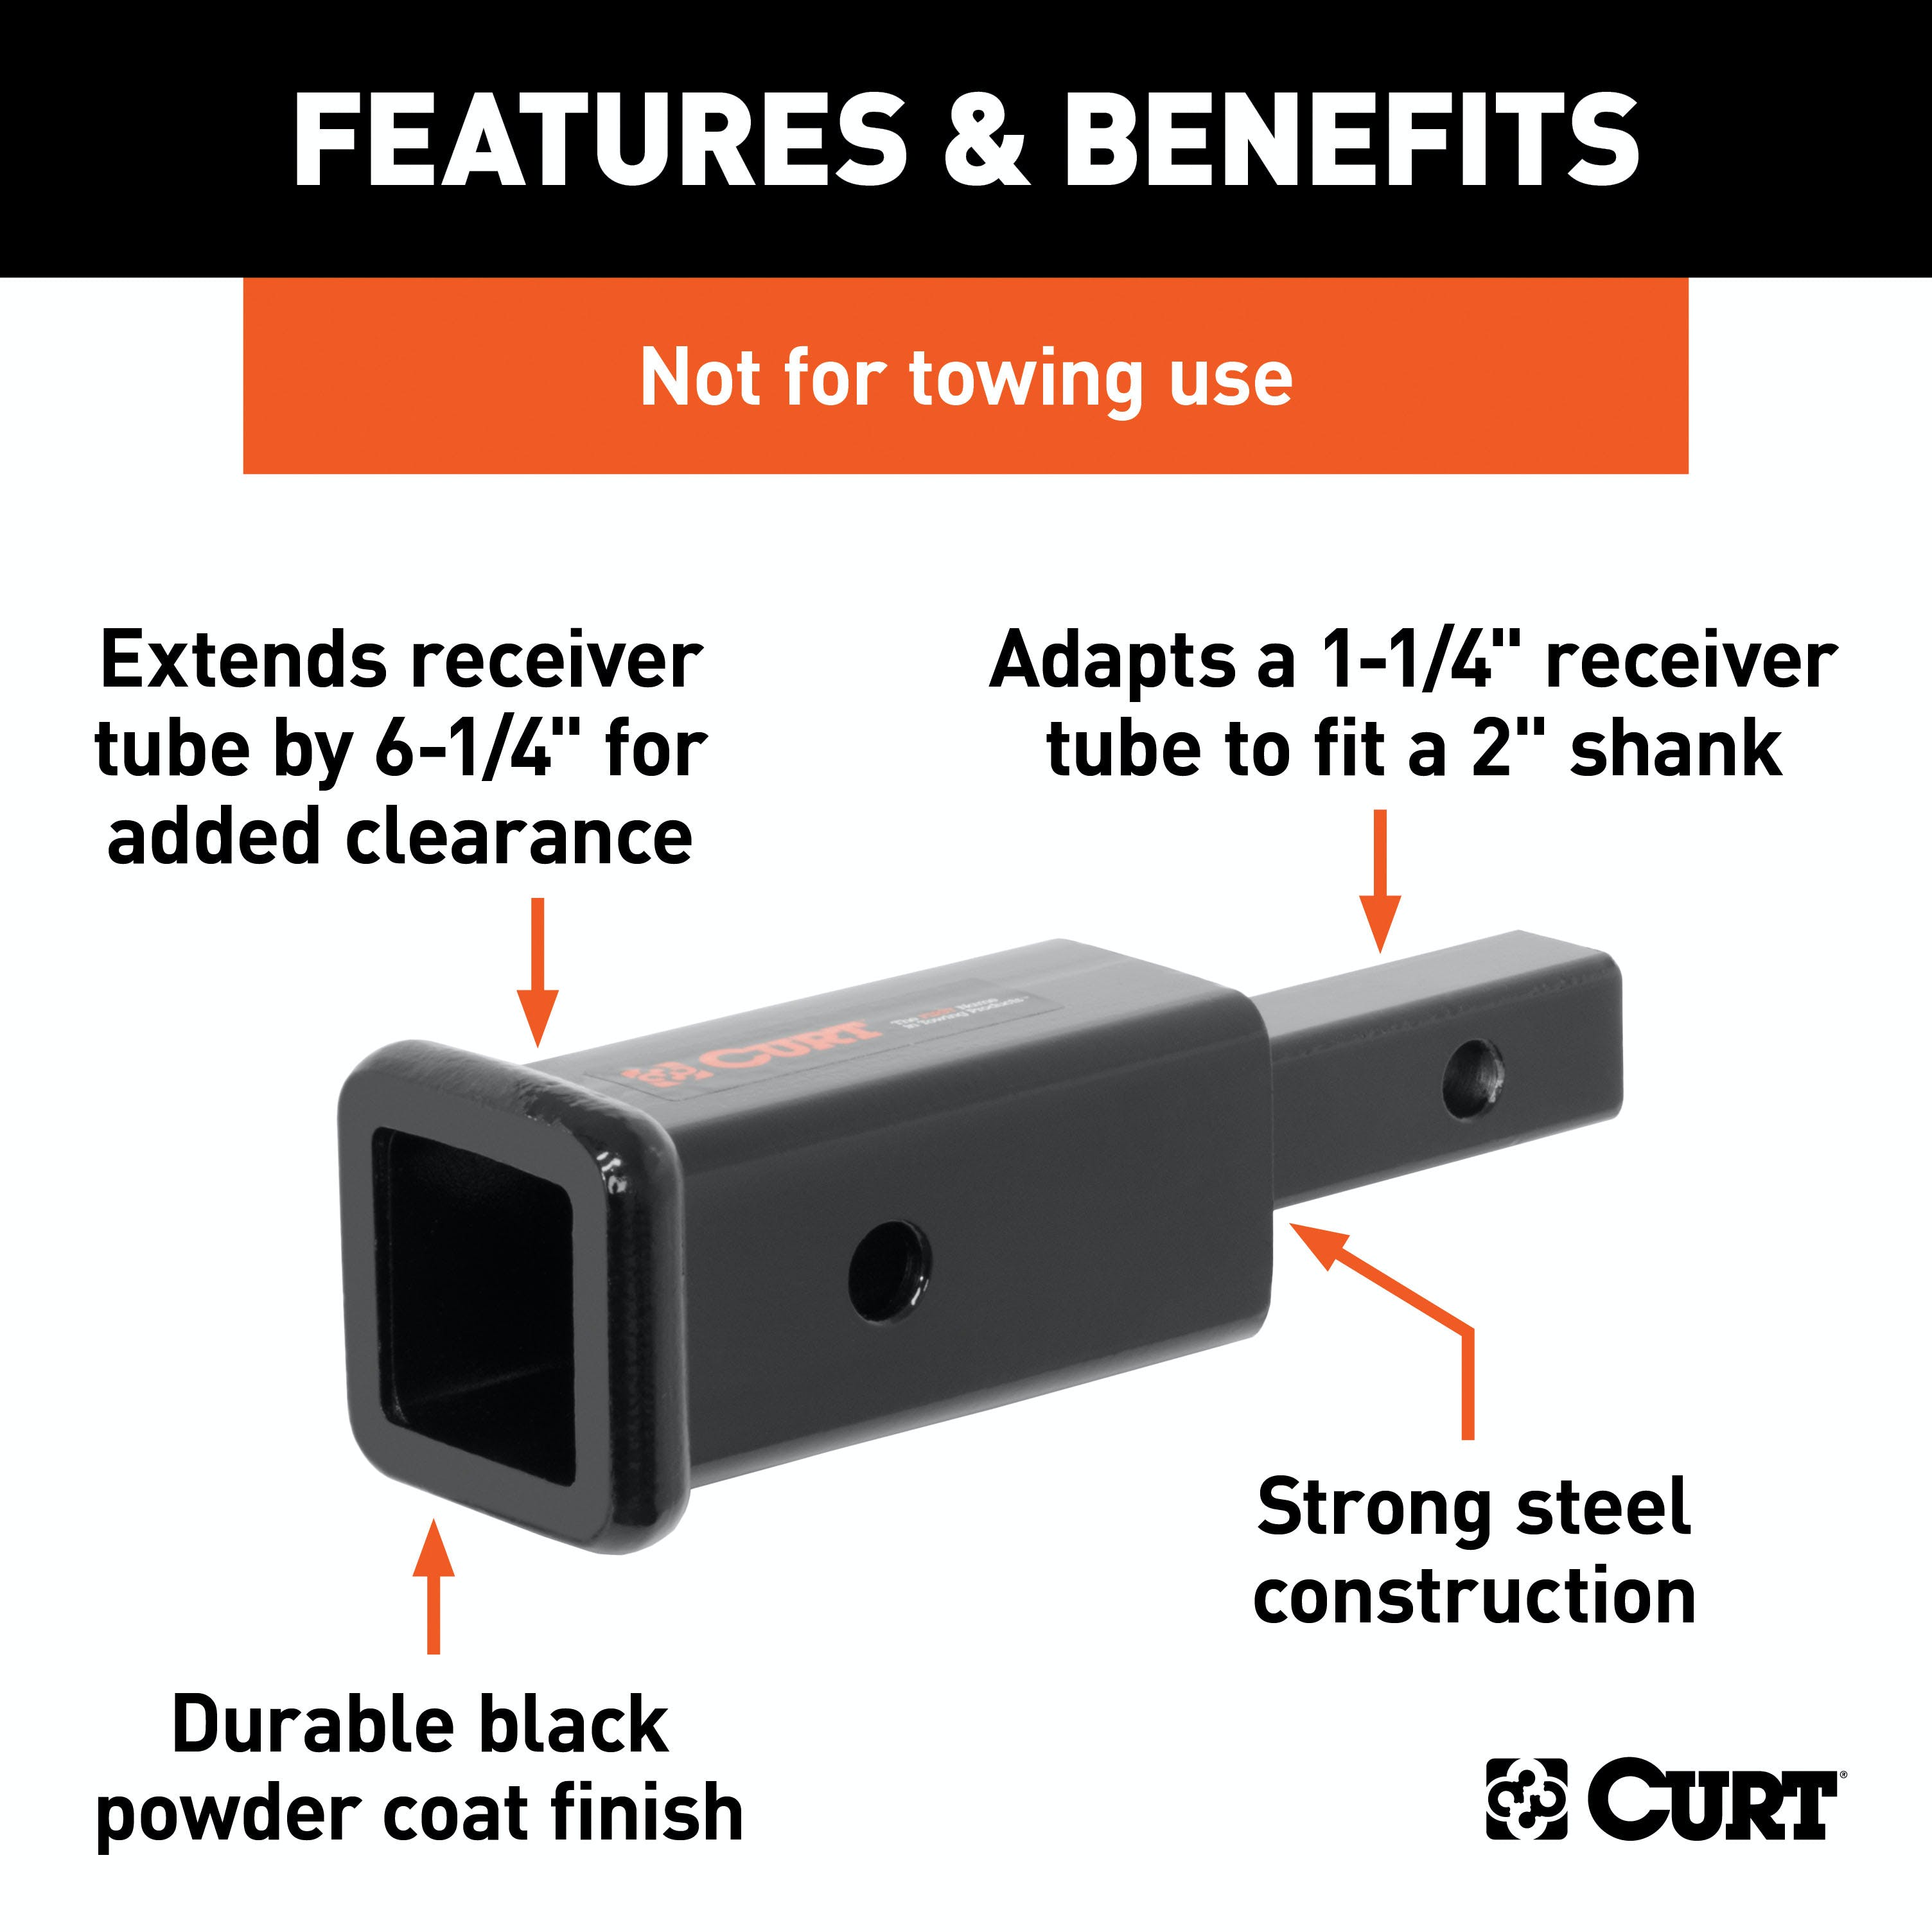 CURT 45785 Receiver Tube Adapter (1-1/4 to 2 Shank, Not for Towing Use, 6-1/4 Length)